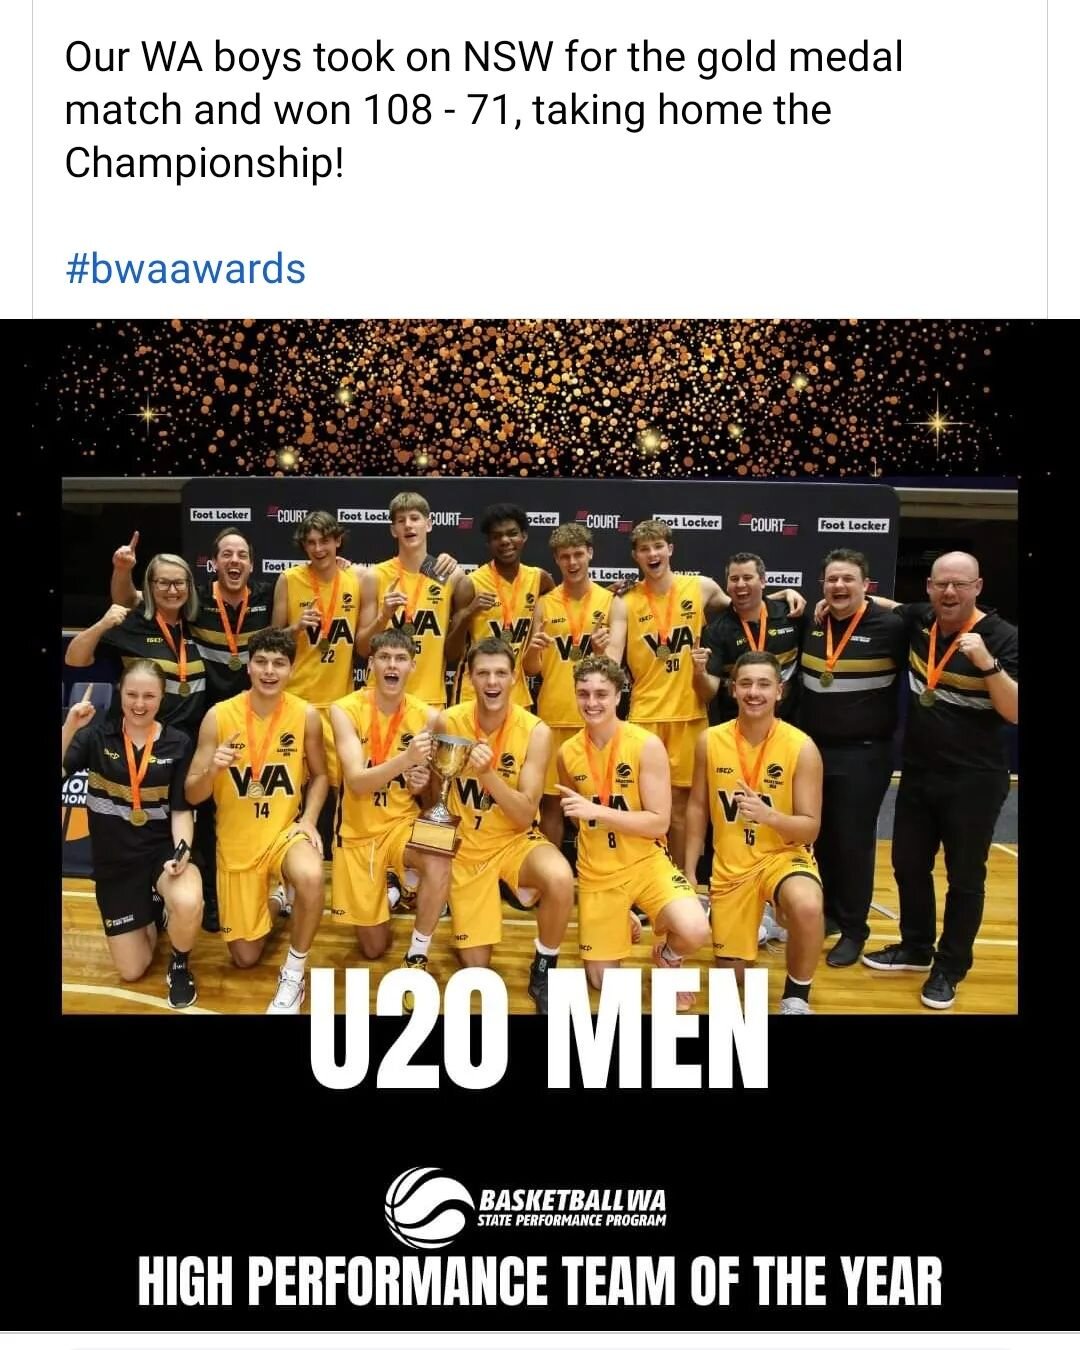 Congrats to physio Clare who toured with the U20s state team earlier this year and have been named the Basketball WA high performance team of the year. Historic clean sweep at the tournament with a shiny gold medal to top it off.

#westisbest #nation